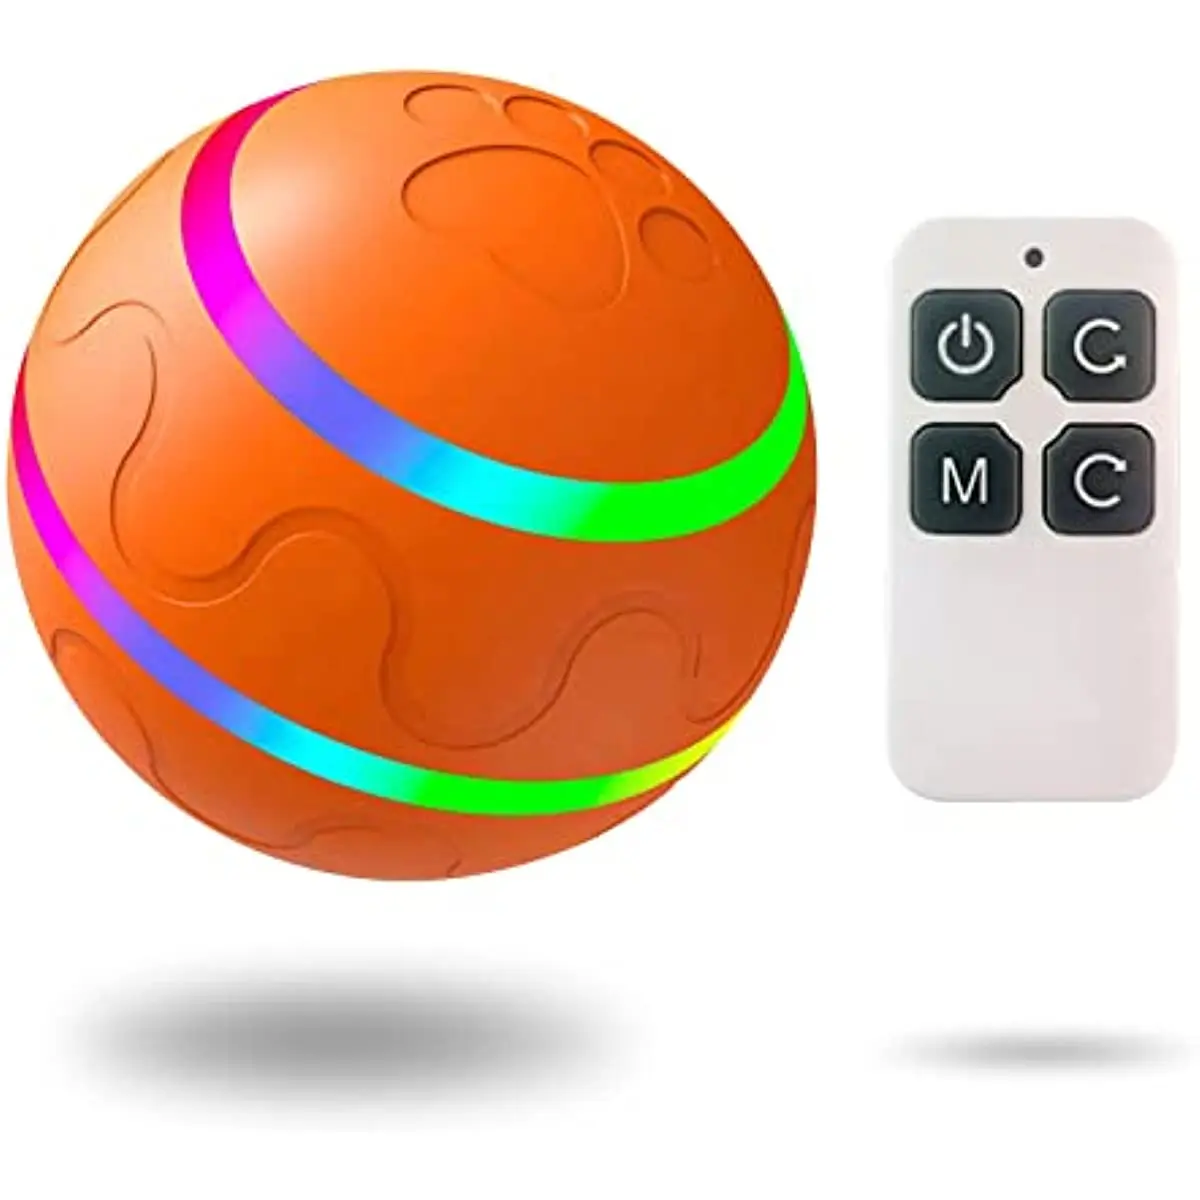 https://ae01.alicdn.com/kf/S17b777d0cd8c43f69e11f8ff51568c1fC/Interactive-Dog-Toy-Ball-with-Remote-Control-Made-of-Natural-Rubber-Wicked-Ball-Jumping-Activation-Automatic.jpg